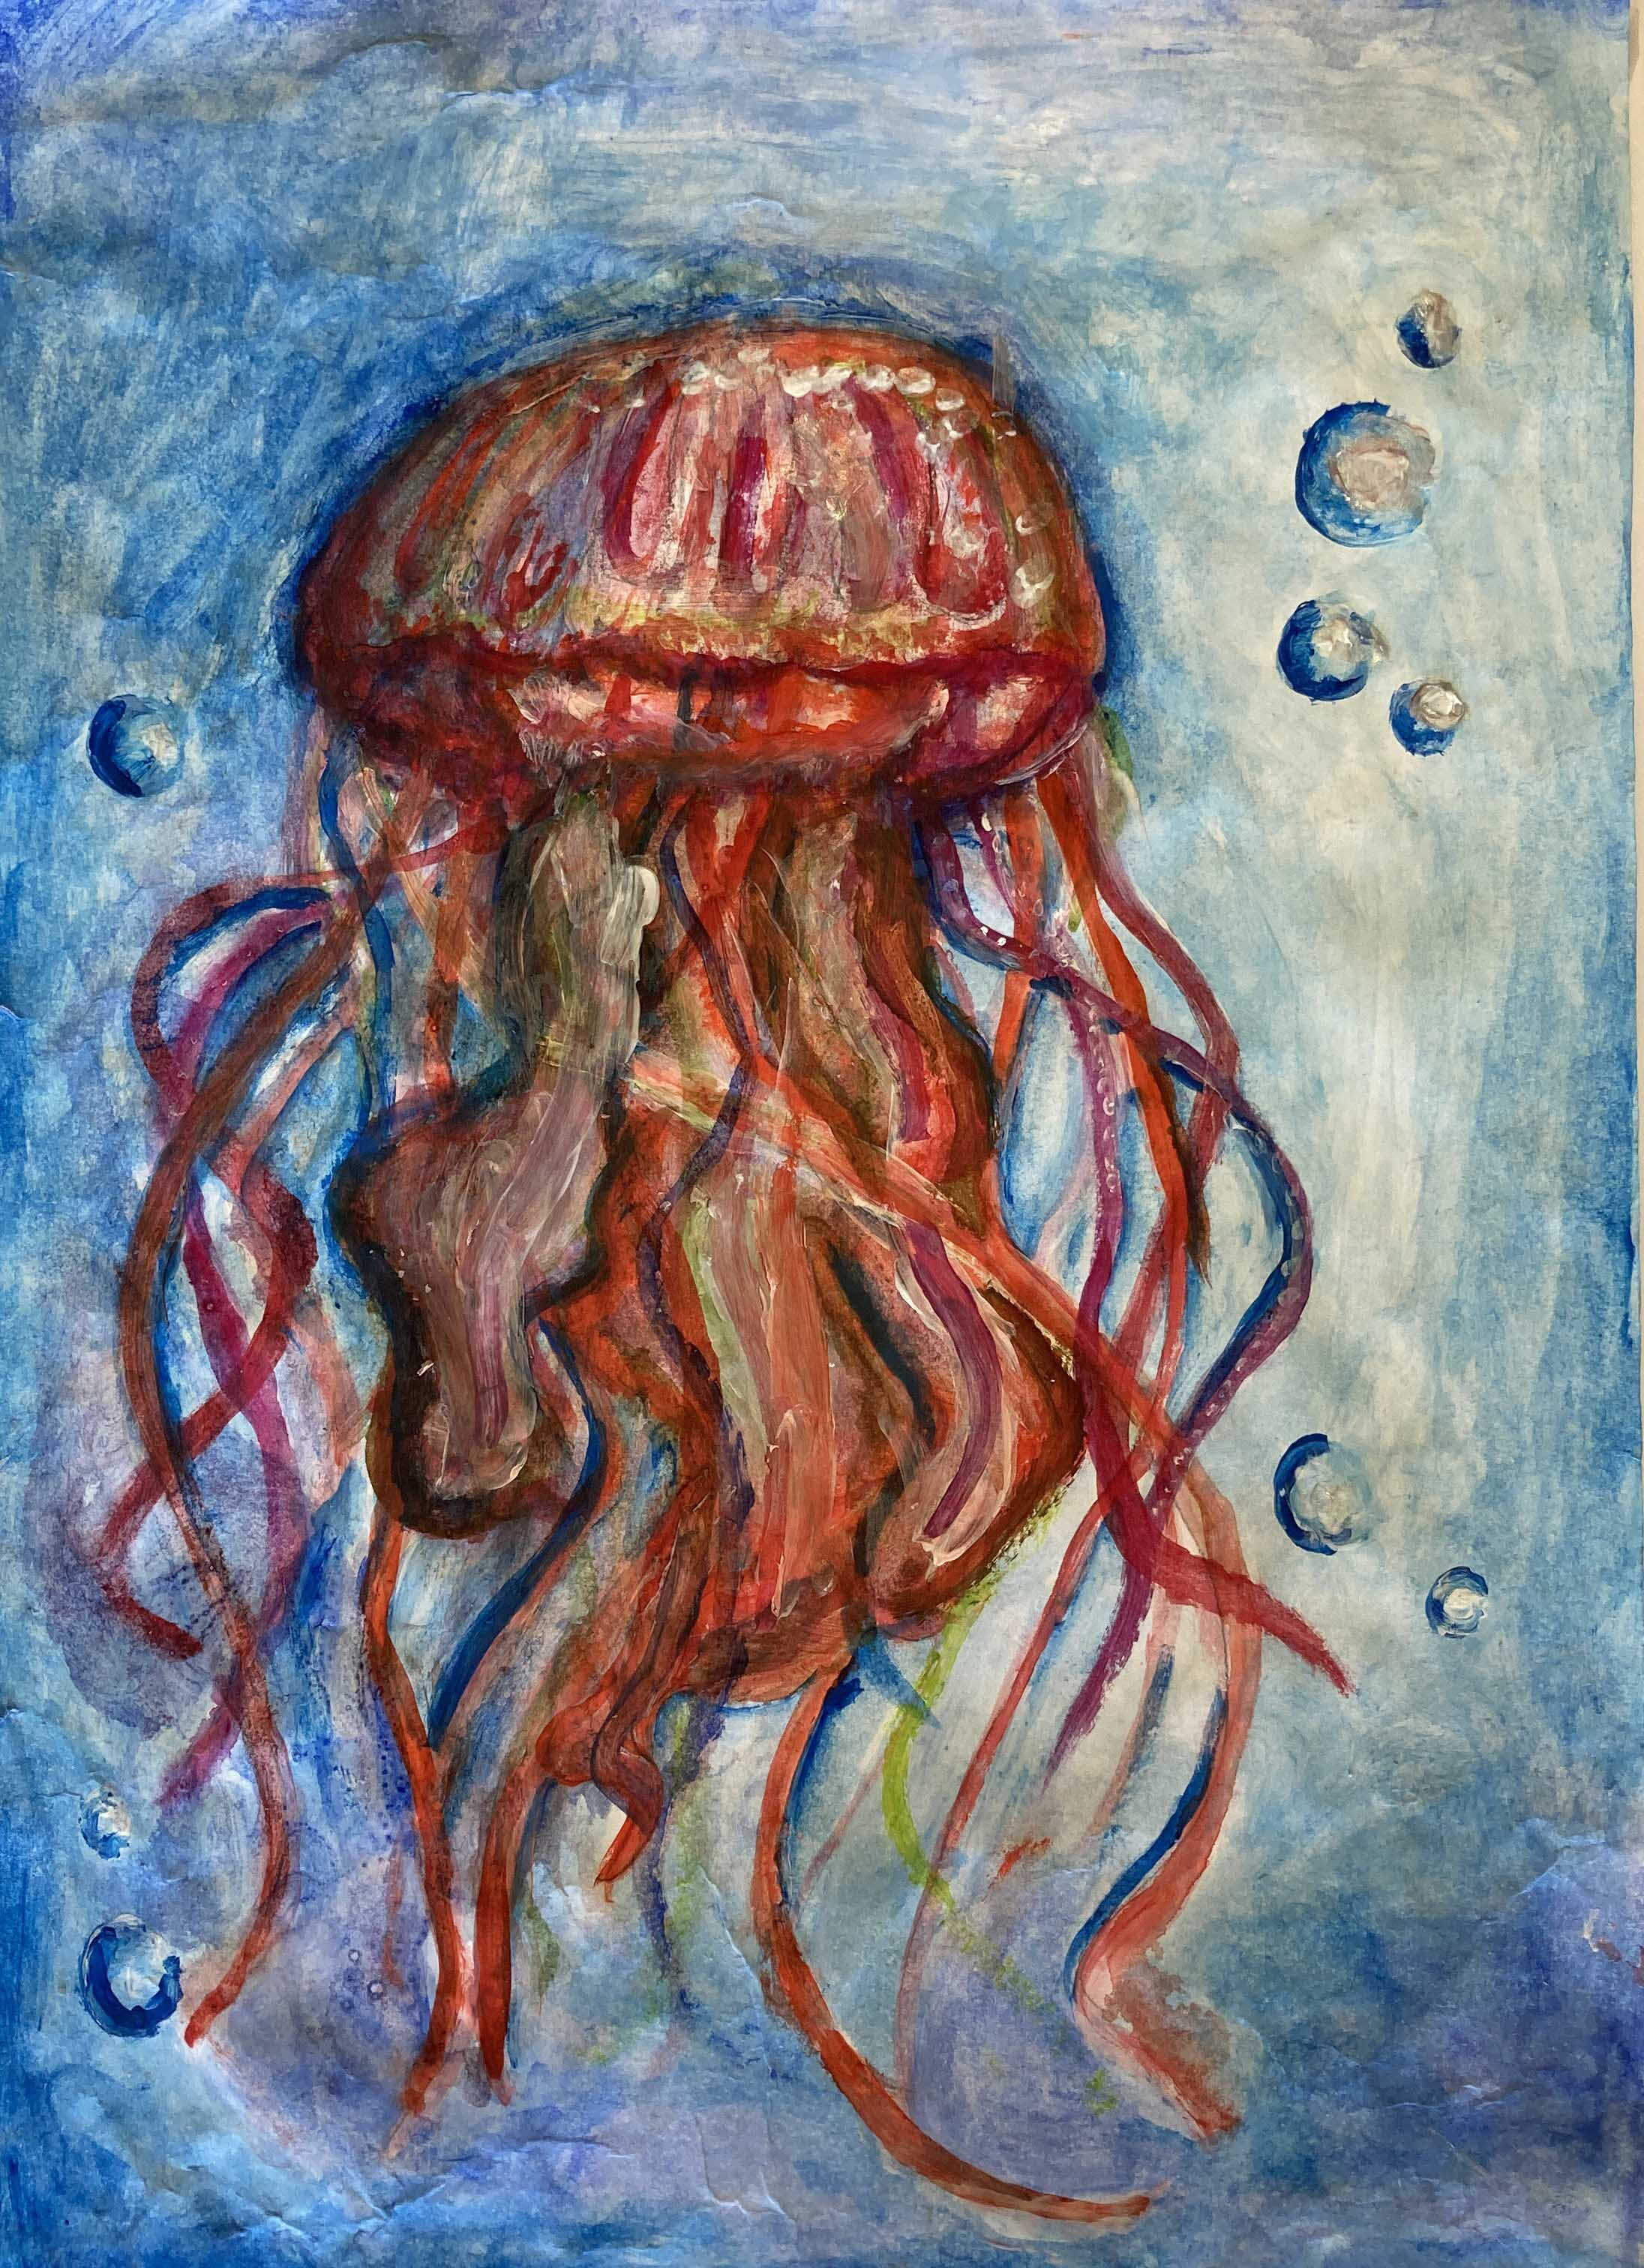 Jellyfish by Erin Brown age 13